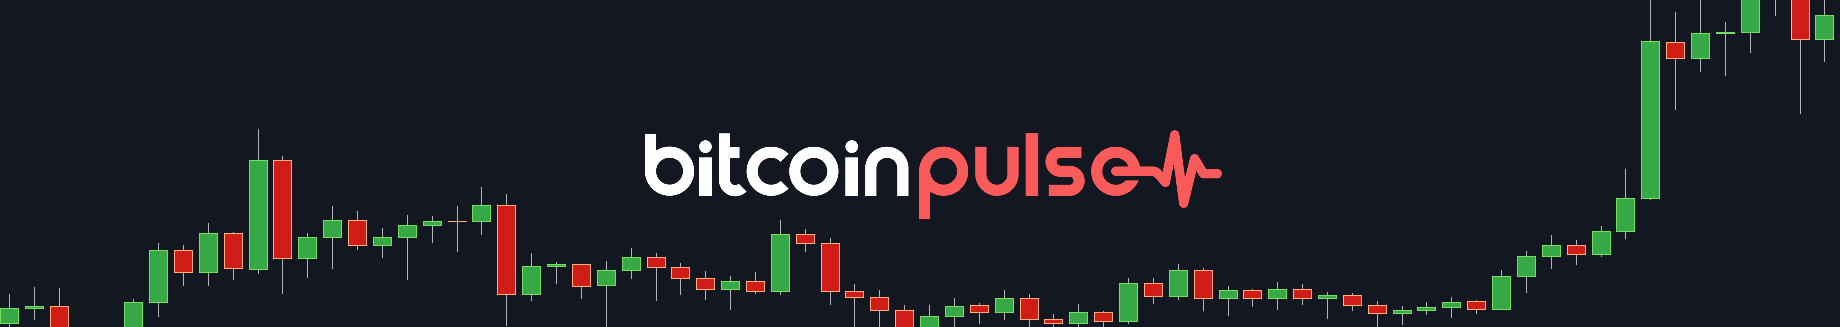 Consolidation is Getting Tight - Bitcoin Pulse #84